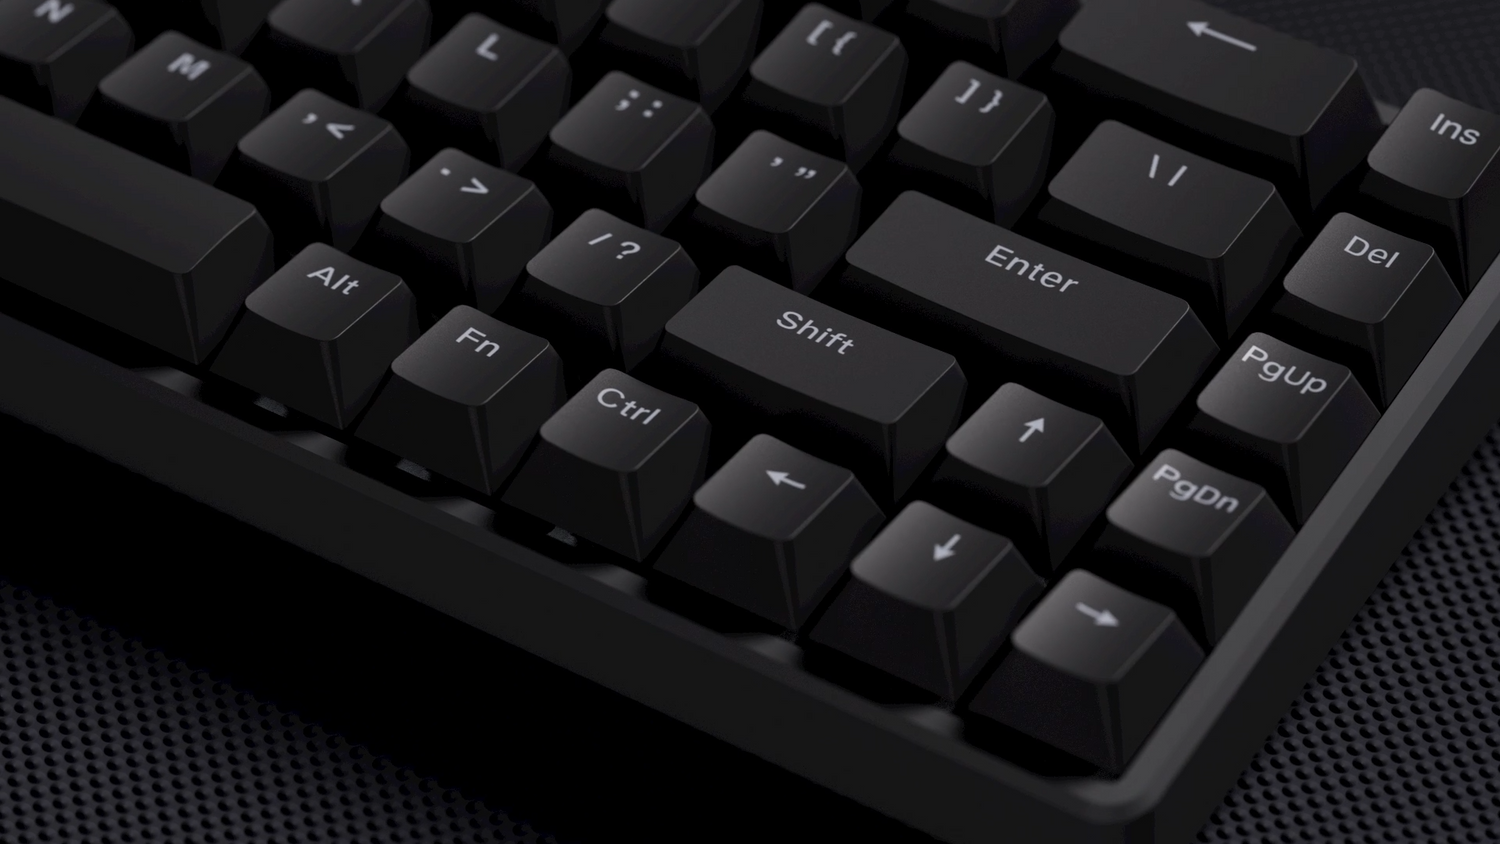 Magnetic Switch Keyboard? What Kind of Keyboard is That?